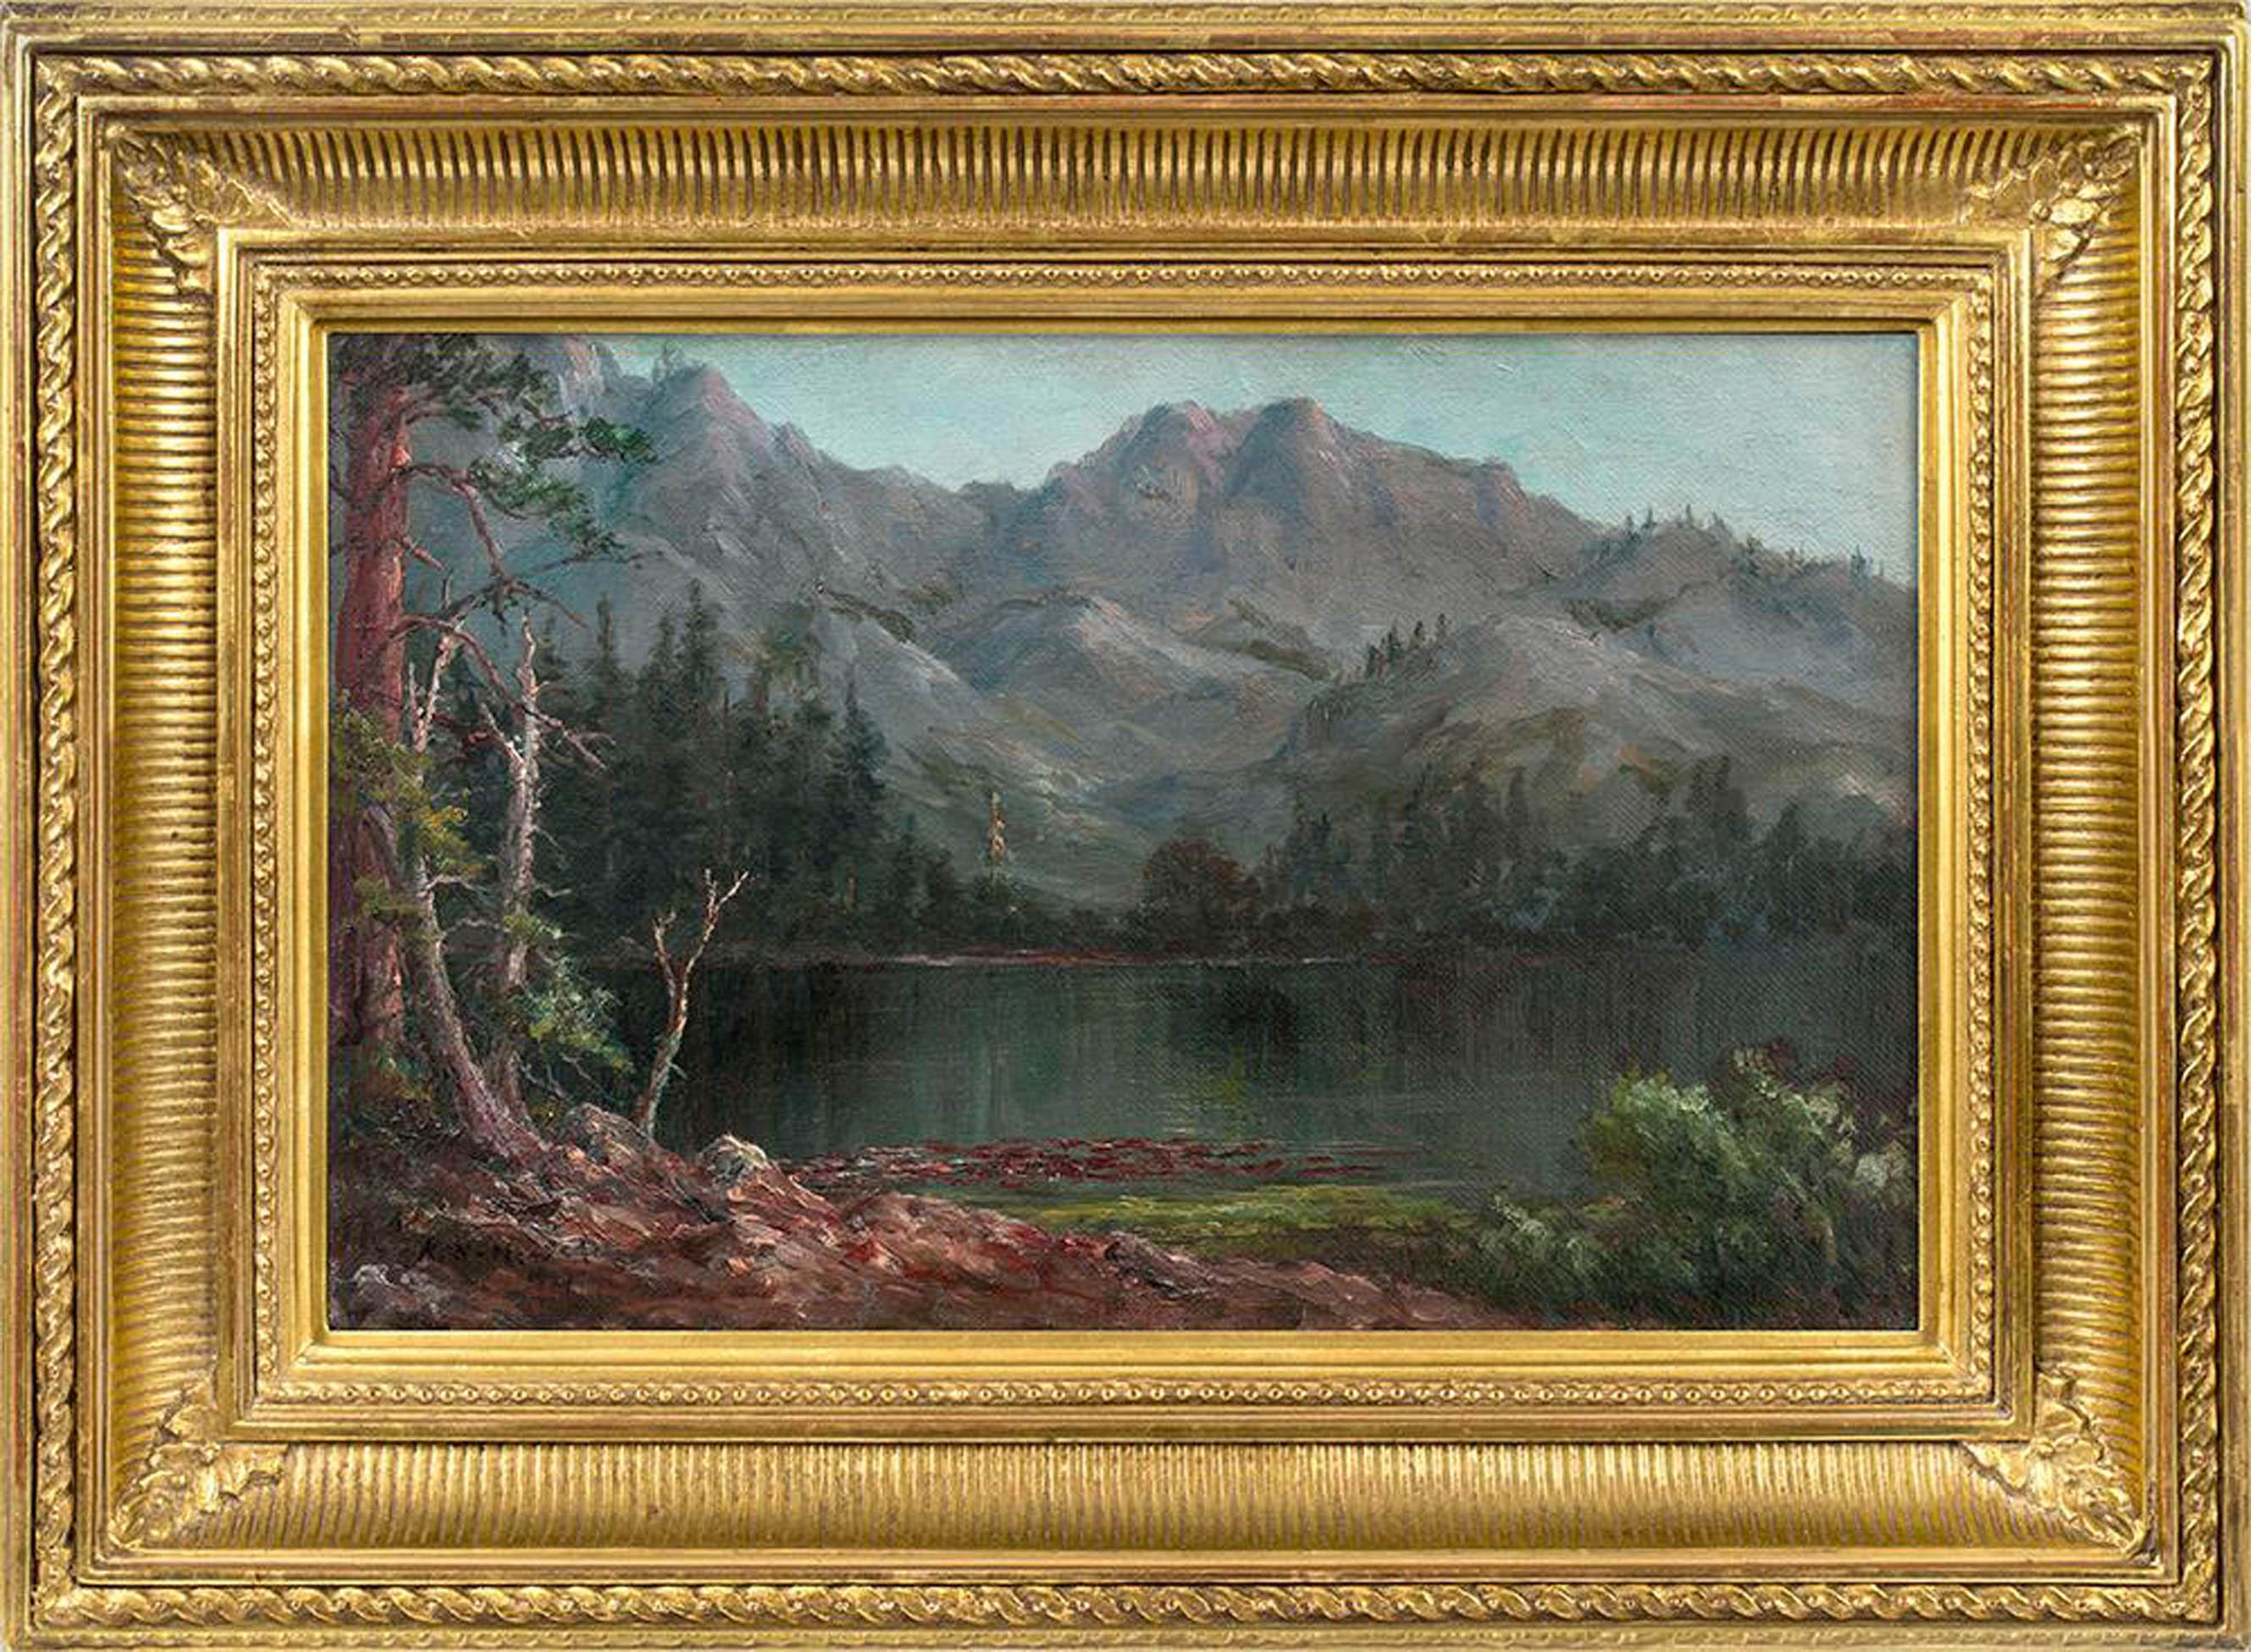 Historic woman artist Kate W. Newhall's painting "In the Sierras" is oil on panel, measures 7 x 11 inches, and is signed at the lower left. The work is framed in an elegant, period appropriate frame and ready to hang.

Catherine White Newhall, more